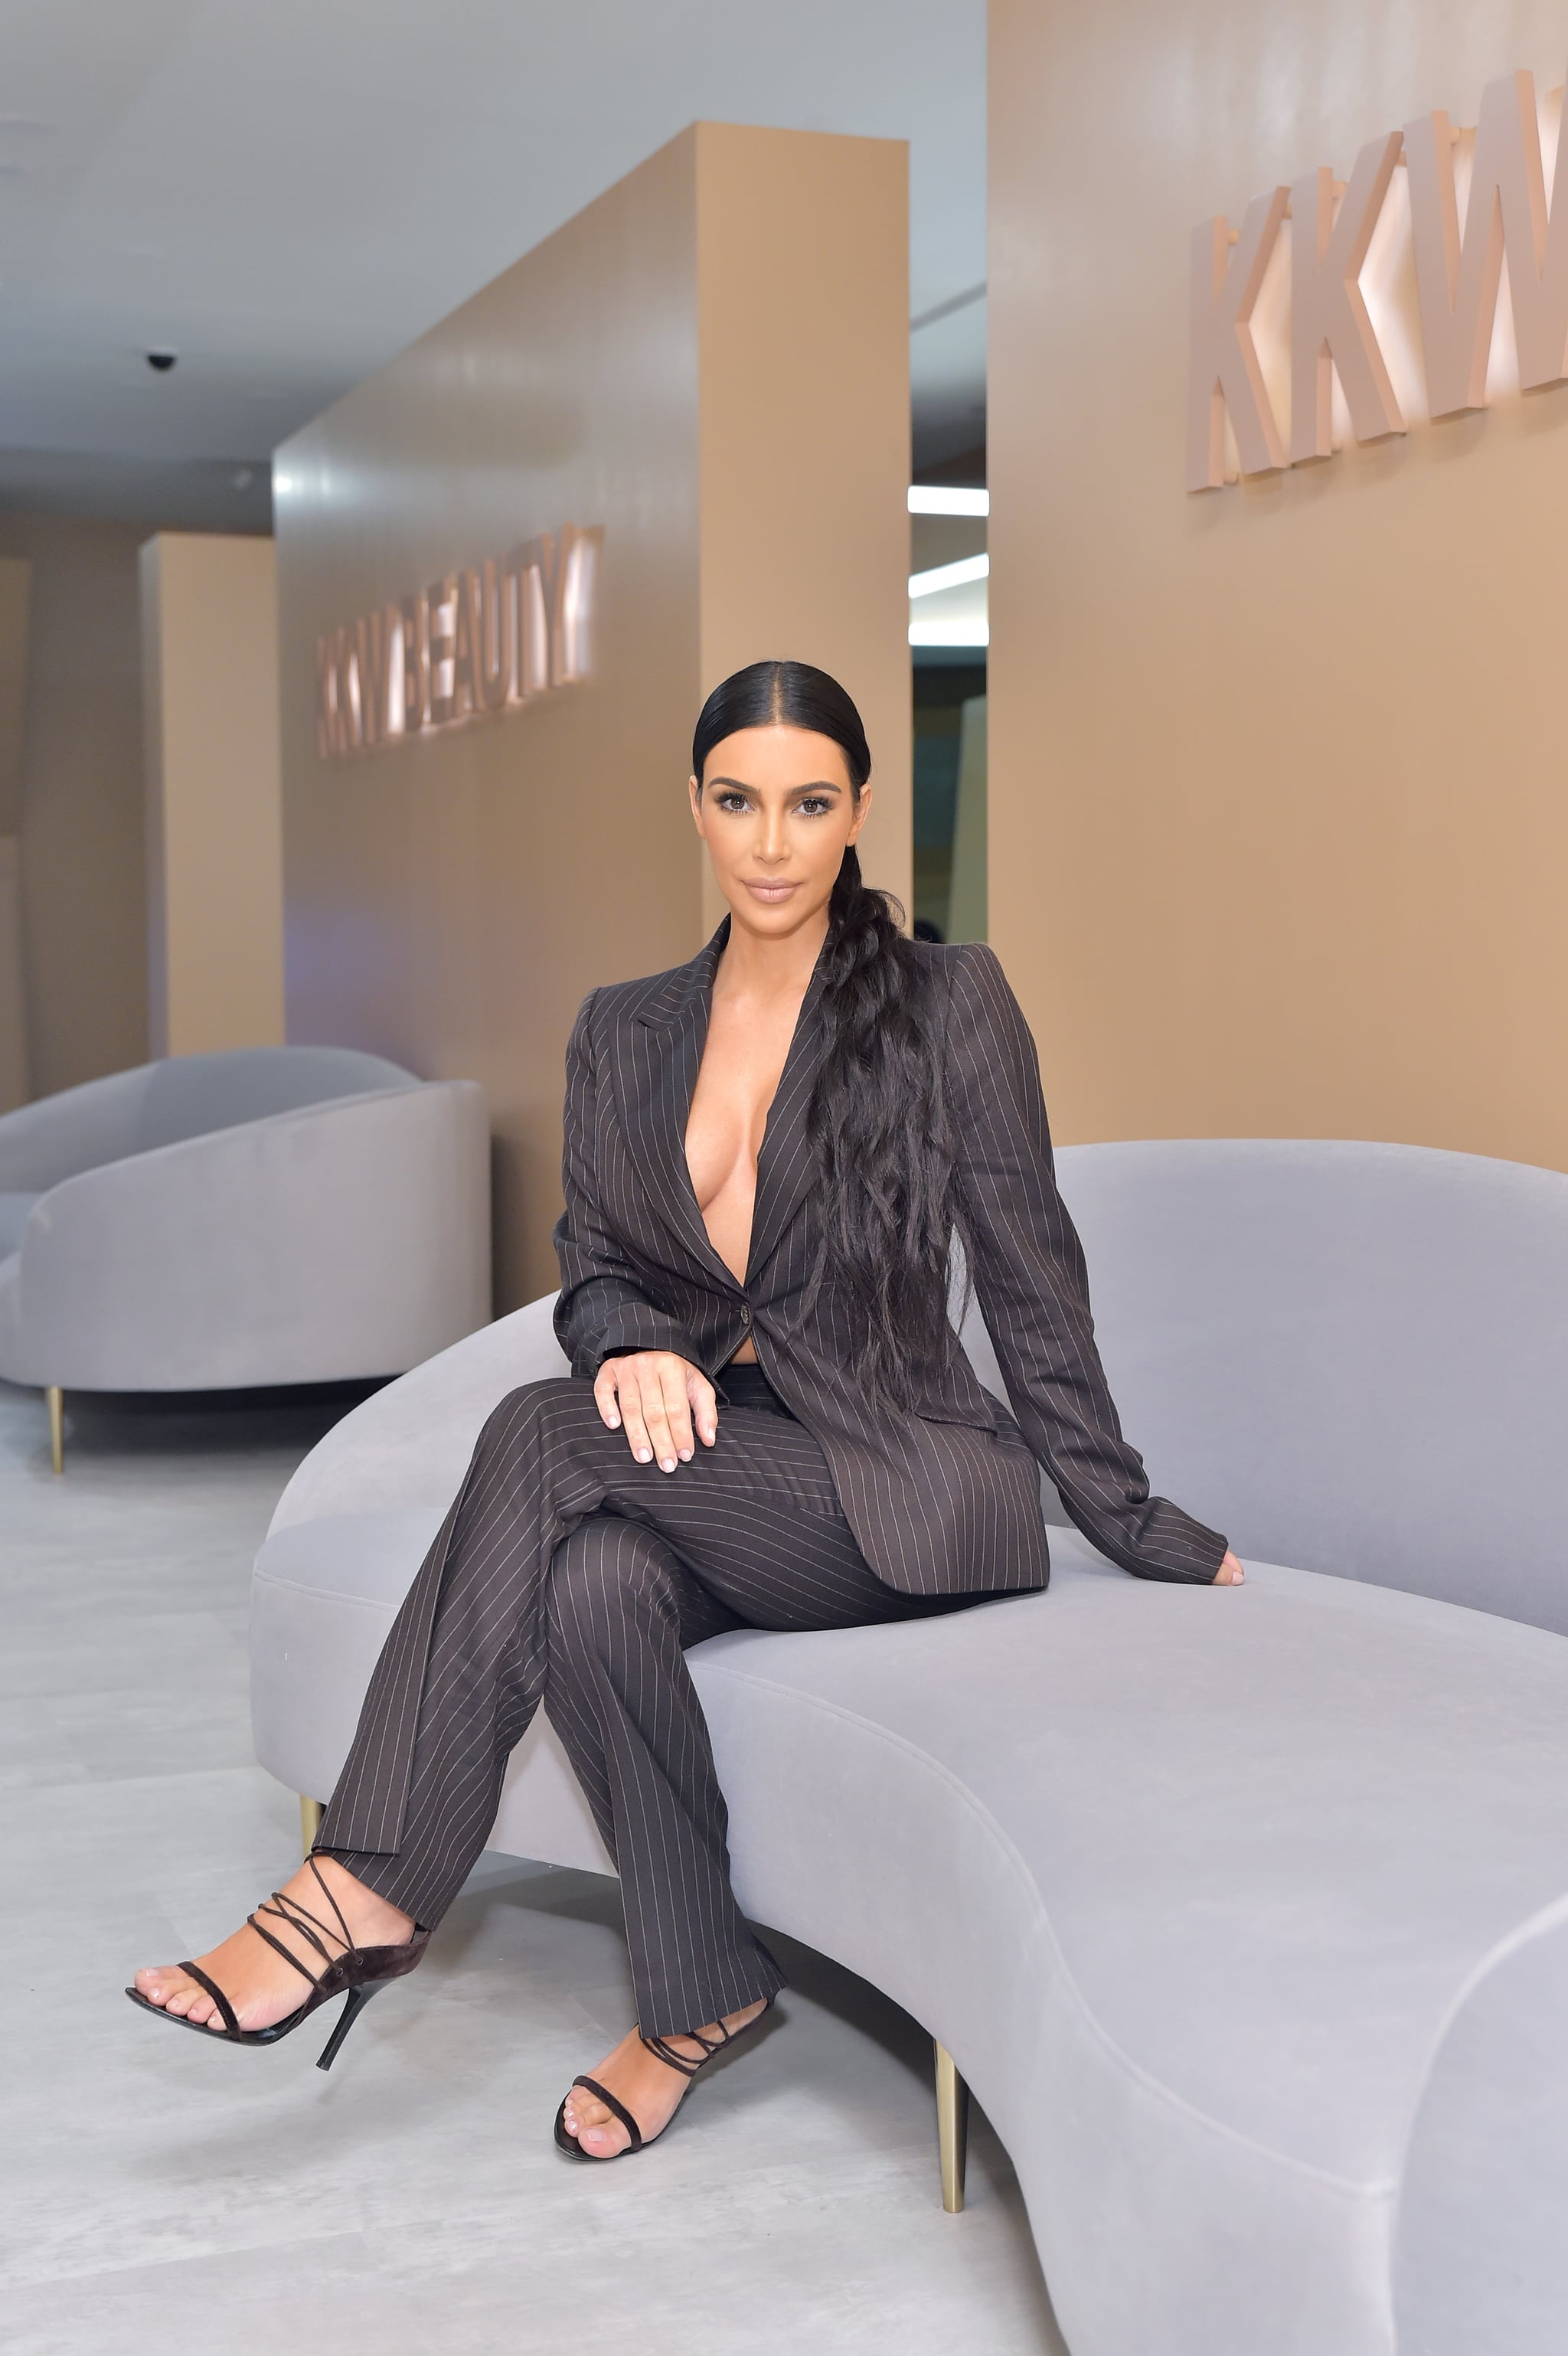 COSTA MESA, CA - DECEMBER 04:  Kim Kardashian West attends the KKW Beauty Pop-Up at South Coast Plaza on December 4, 2018 in Costa Mesa, California.  (Photo by Stefanie Keenan/Getty Images for KKW Beauty)